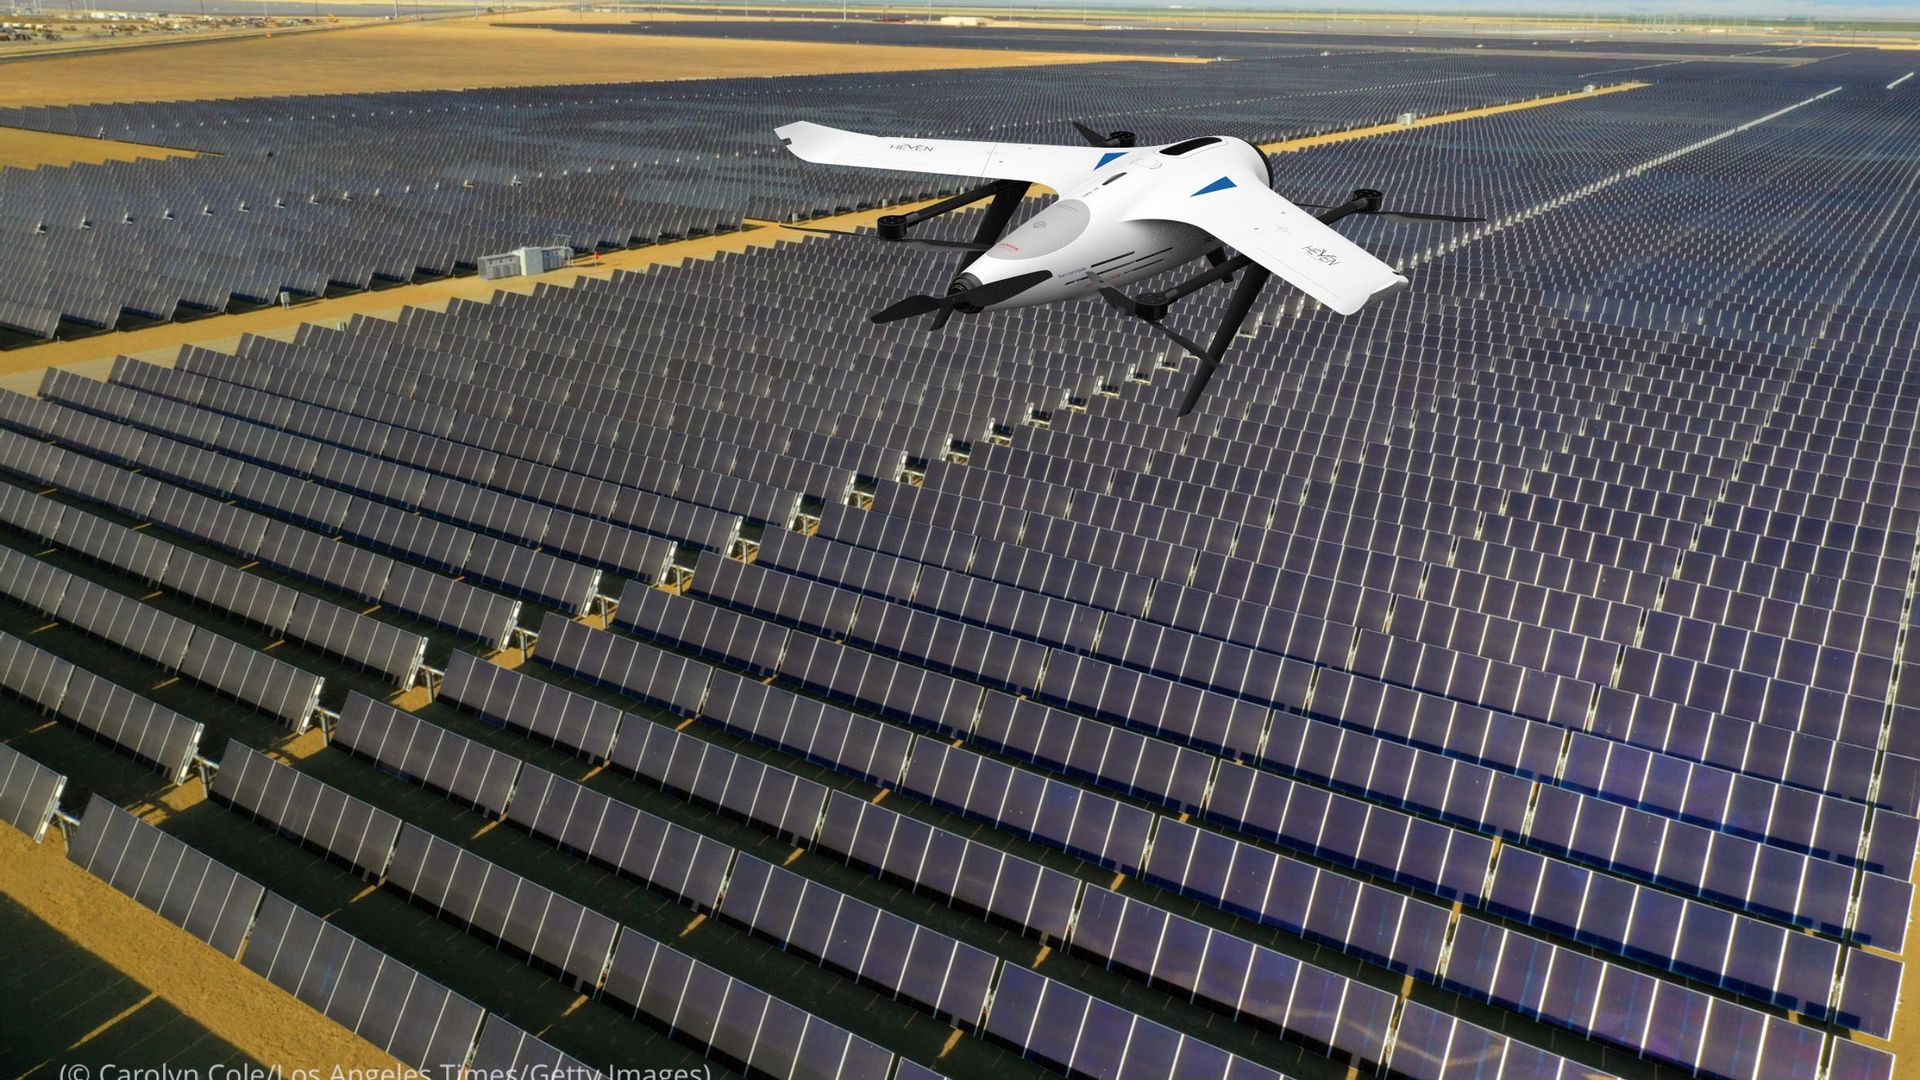 Image of a large hydrogen-powered drone flying over a large solar panel field